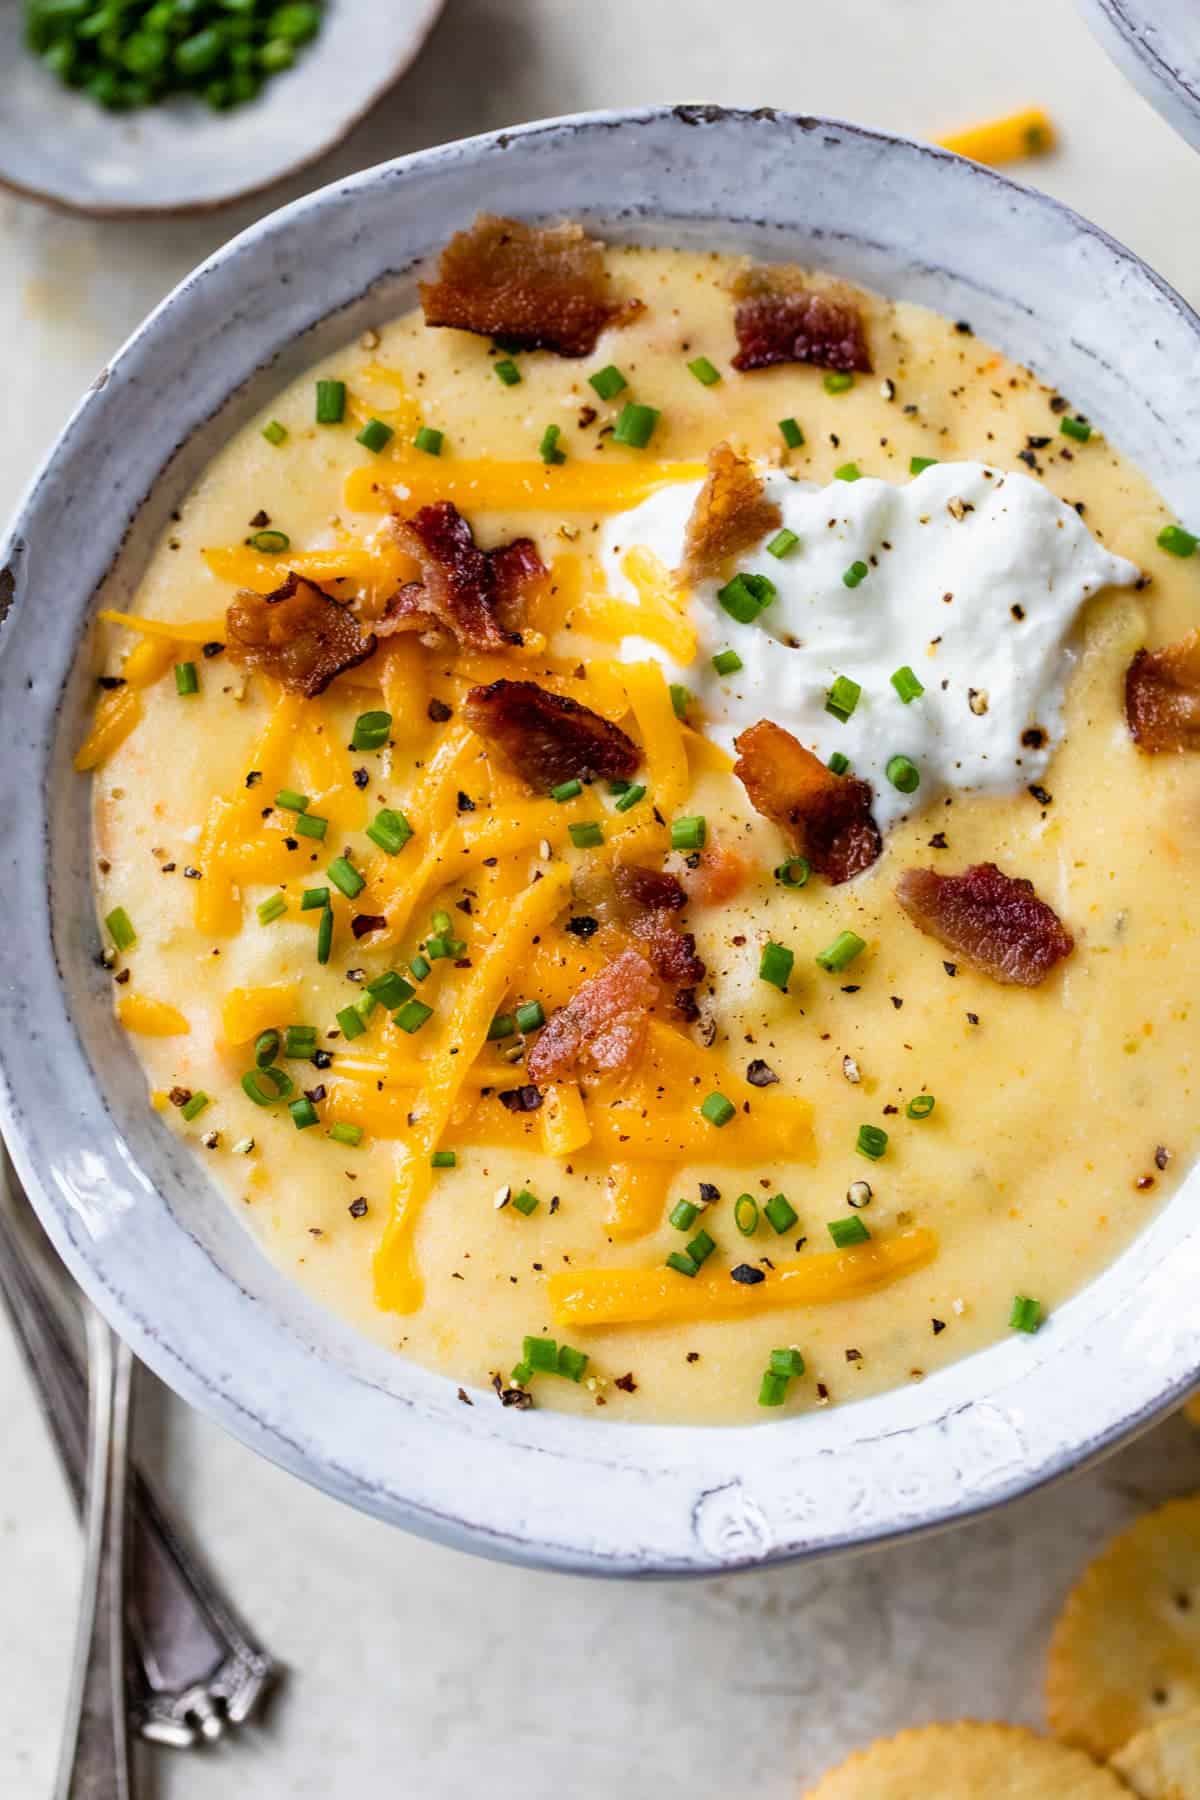 Crockpot Potato Soup from Well Plated